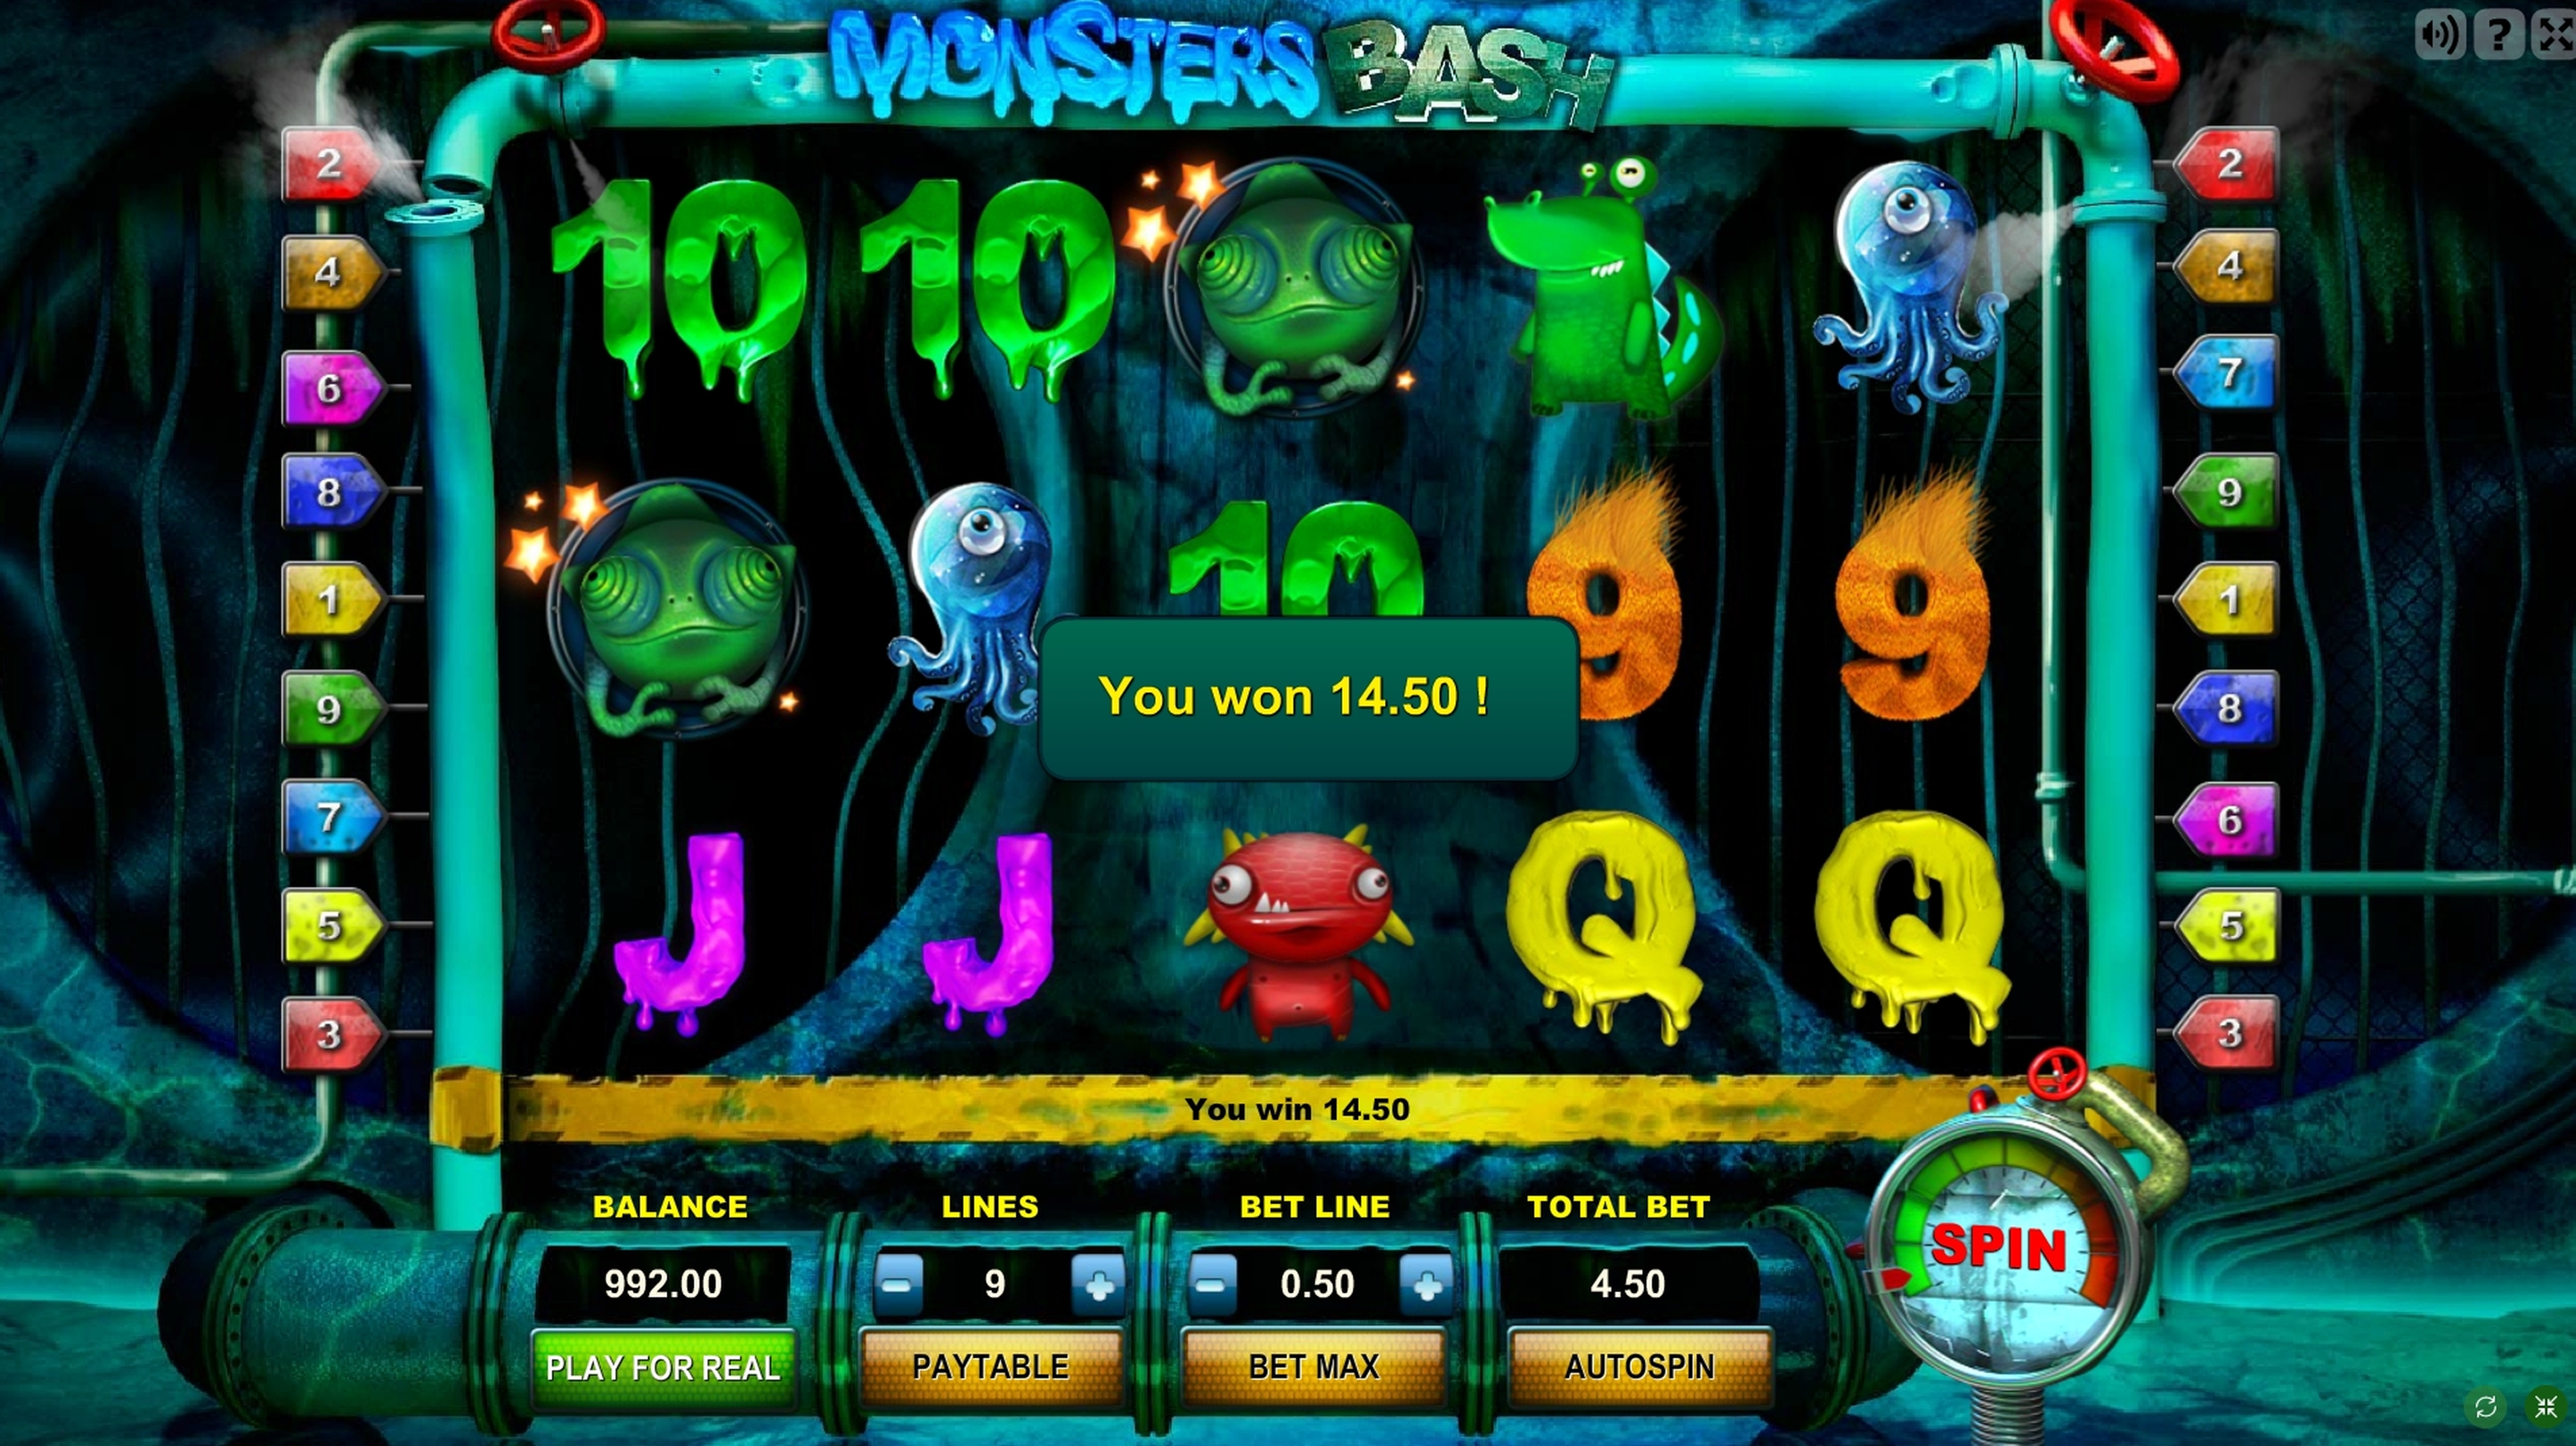 Win Money in Monsters Bash Free Slot Game by Gamescale Software